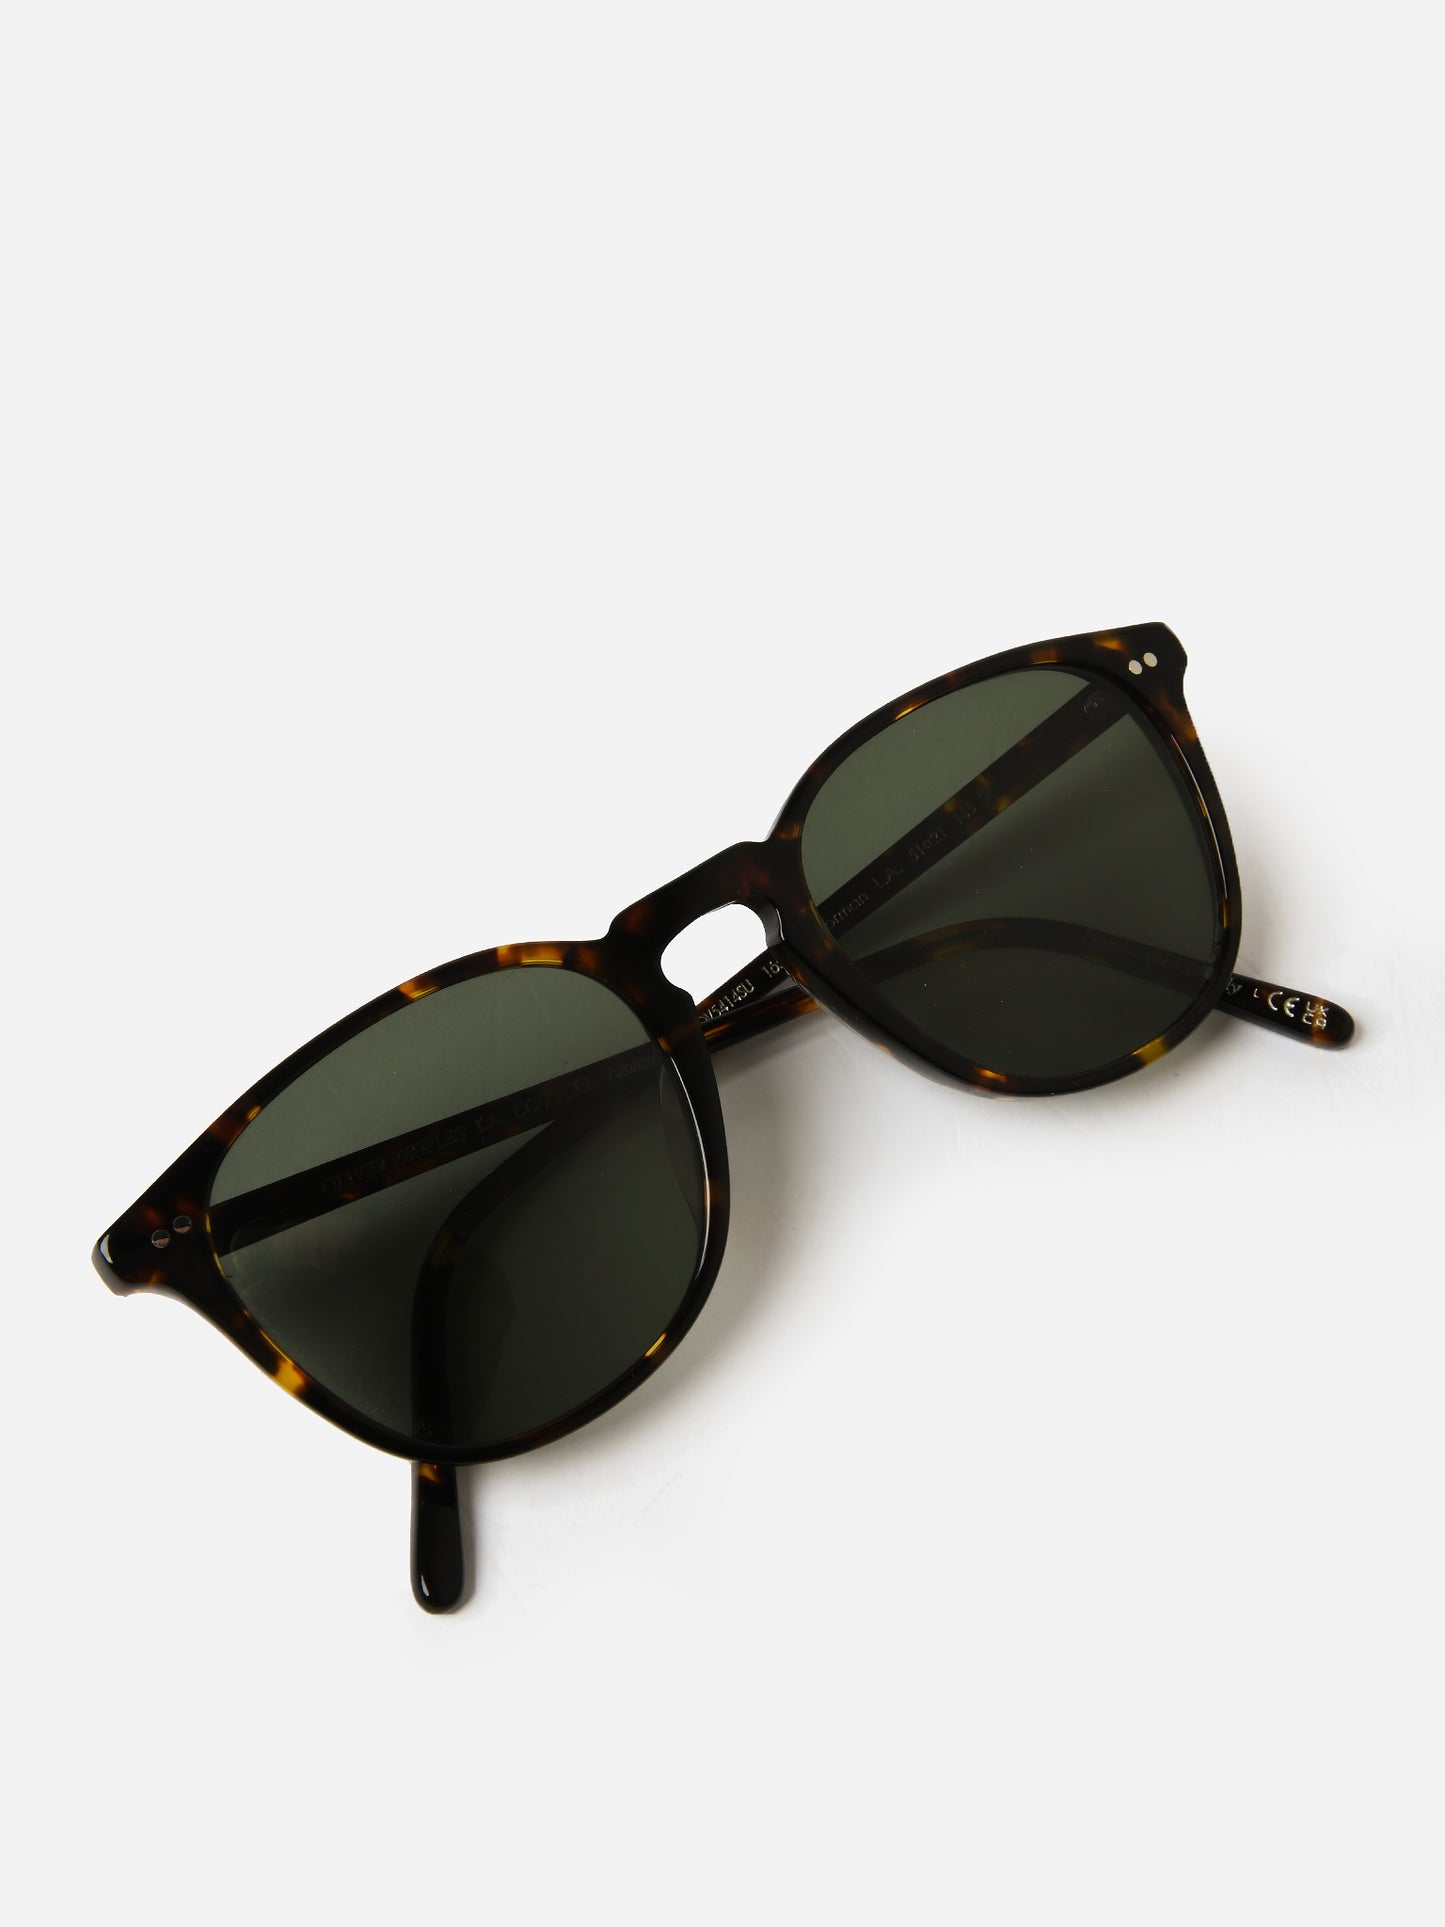 Oliver Peoples Forman L.A. Sunglasses